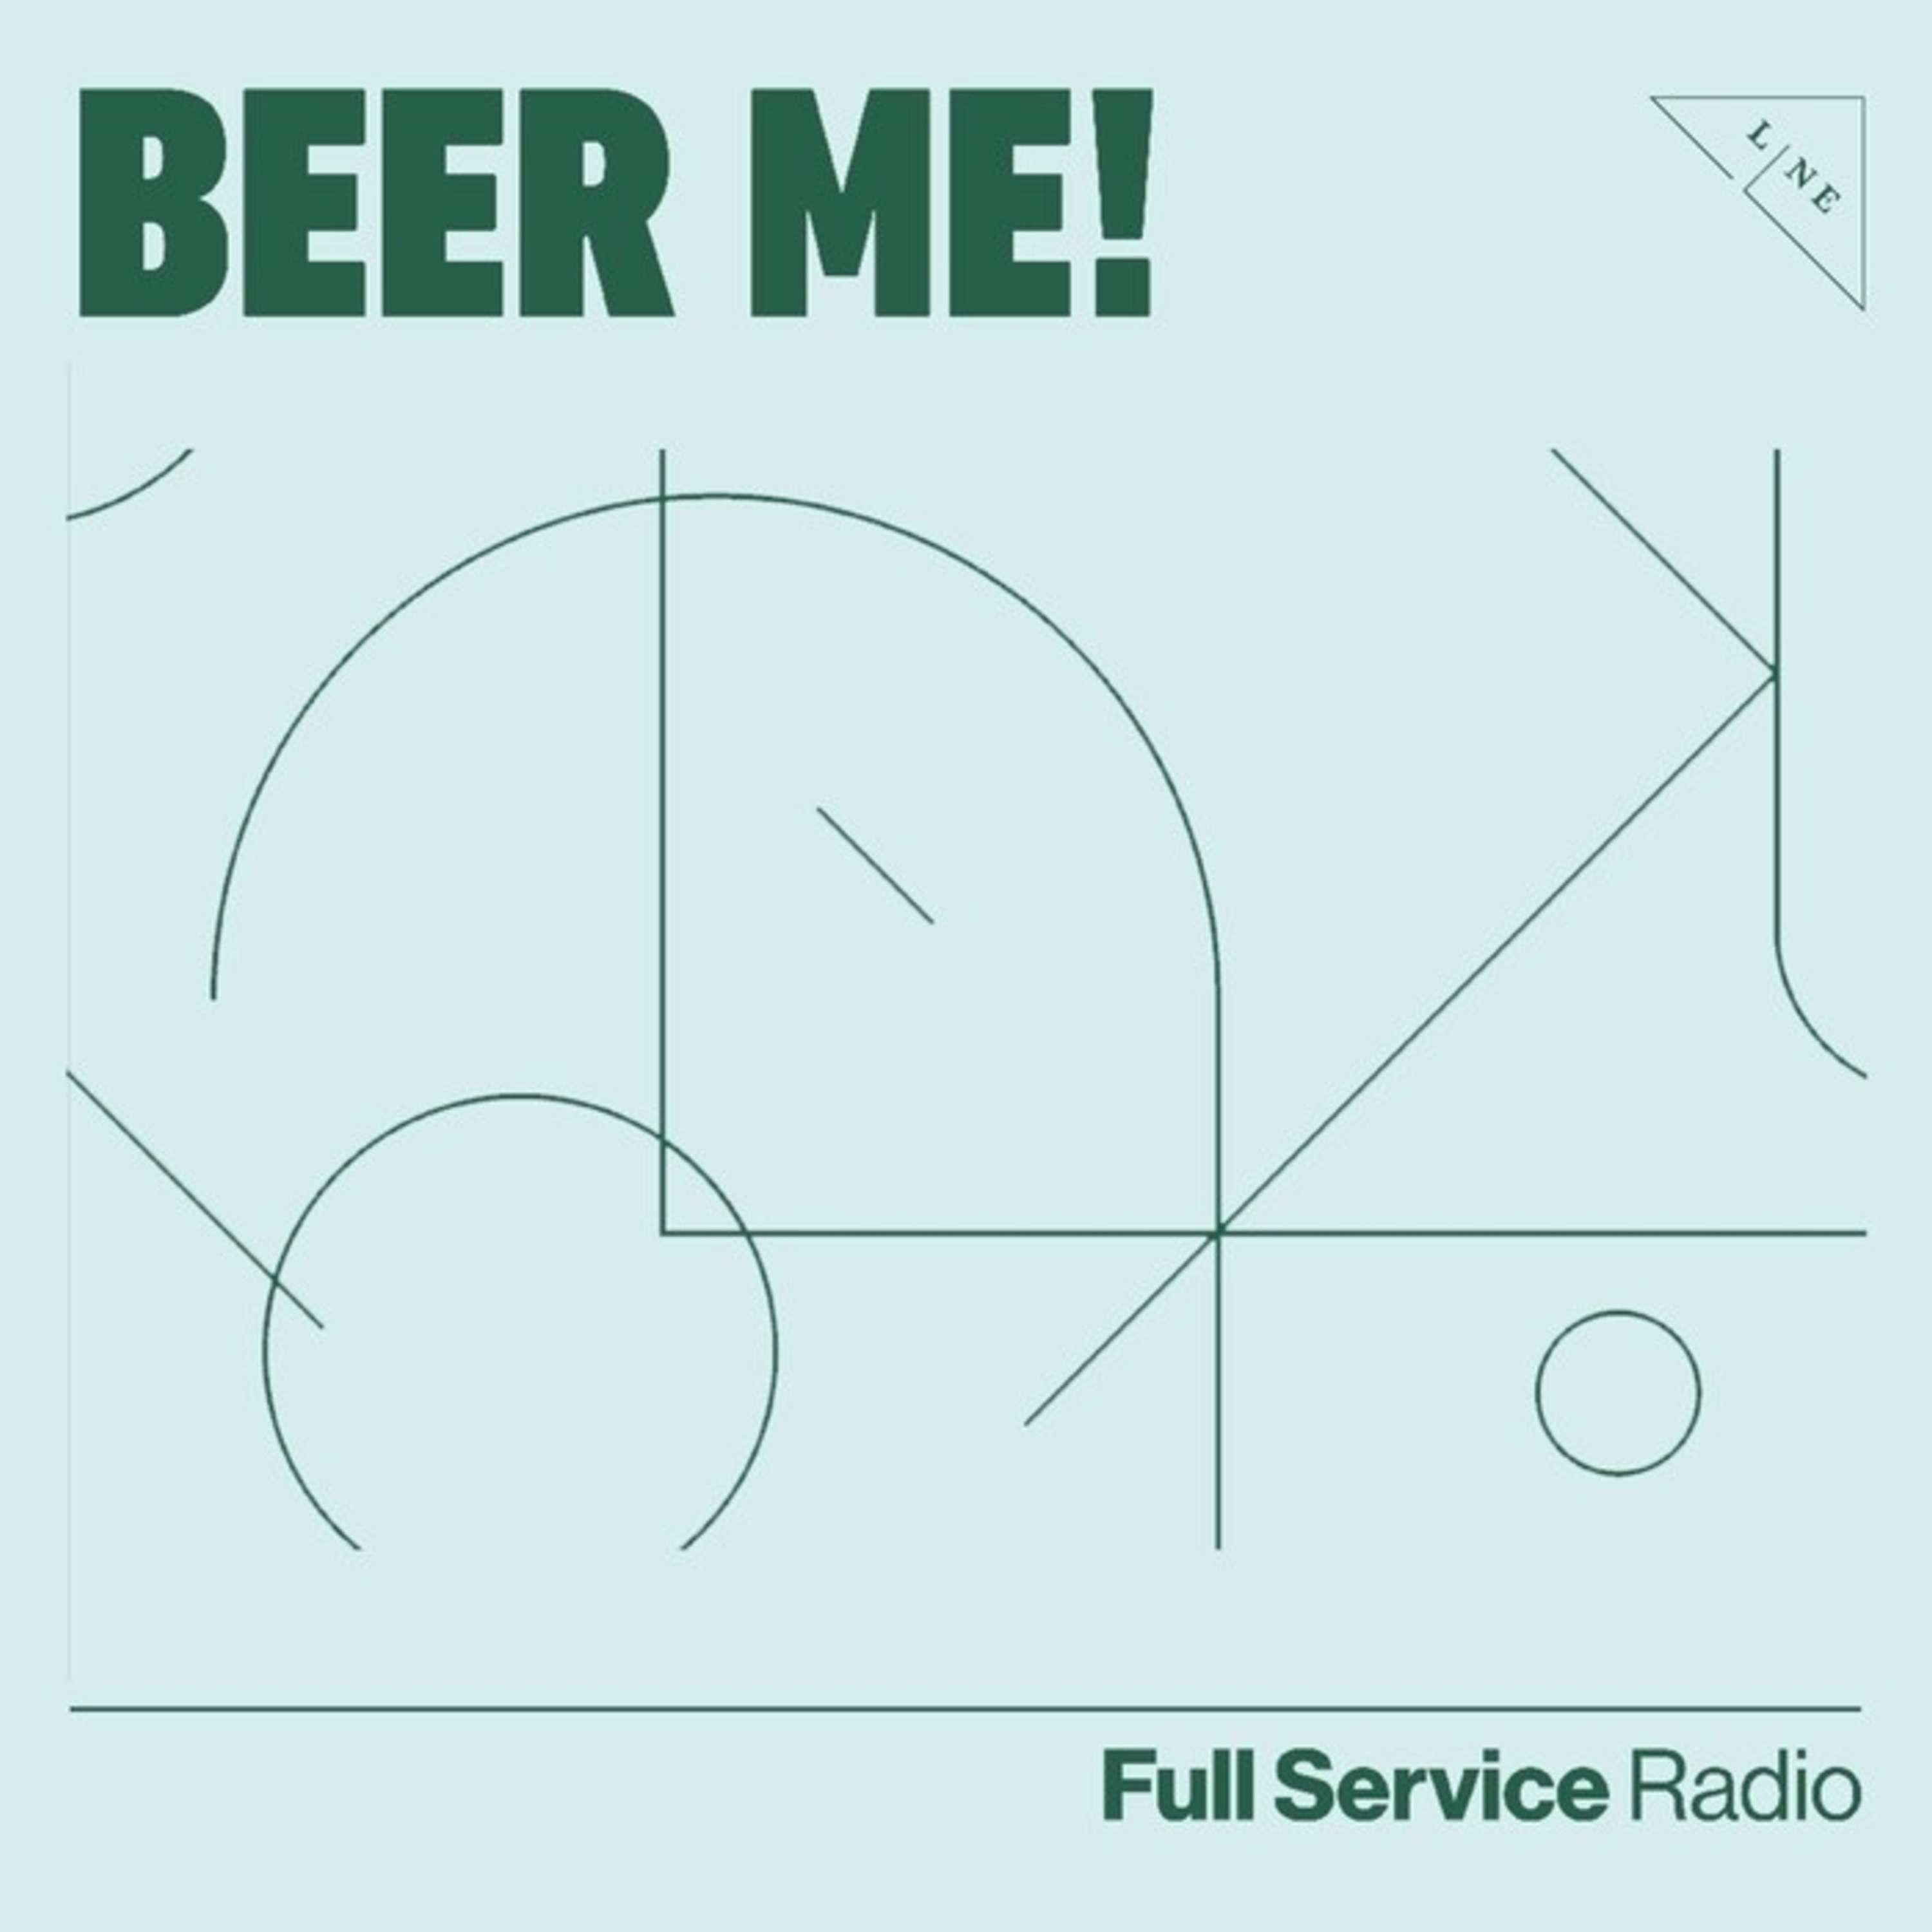 Debut Episode! Katherine “Katie” Marisic, Federal Affairs Manager at the Brewers Association